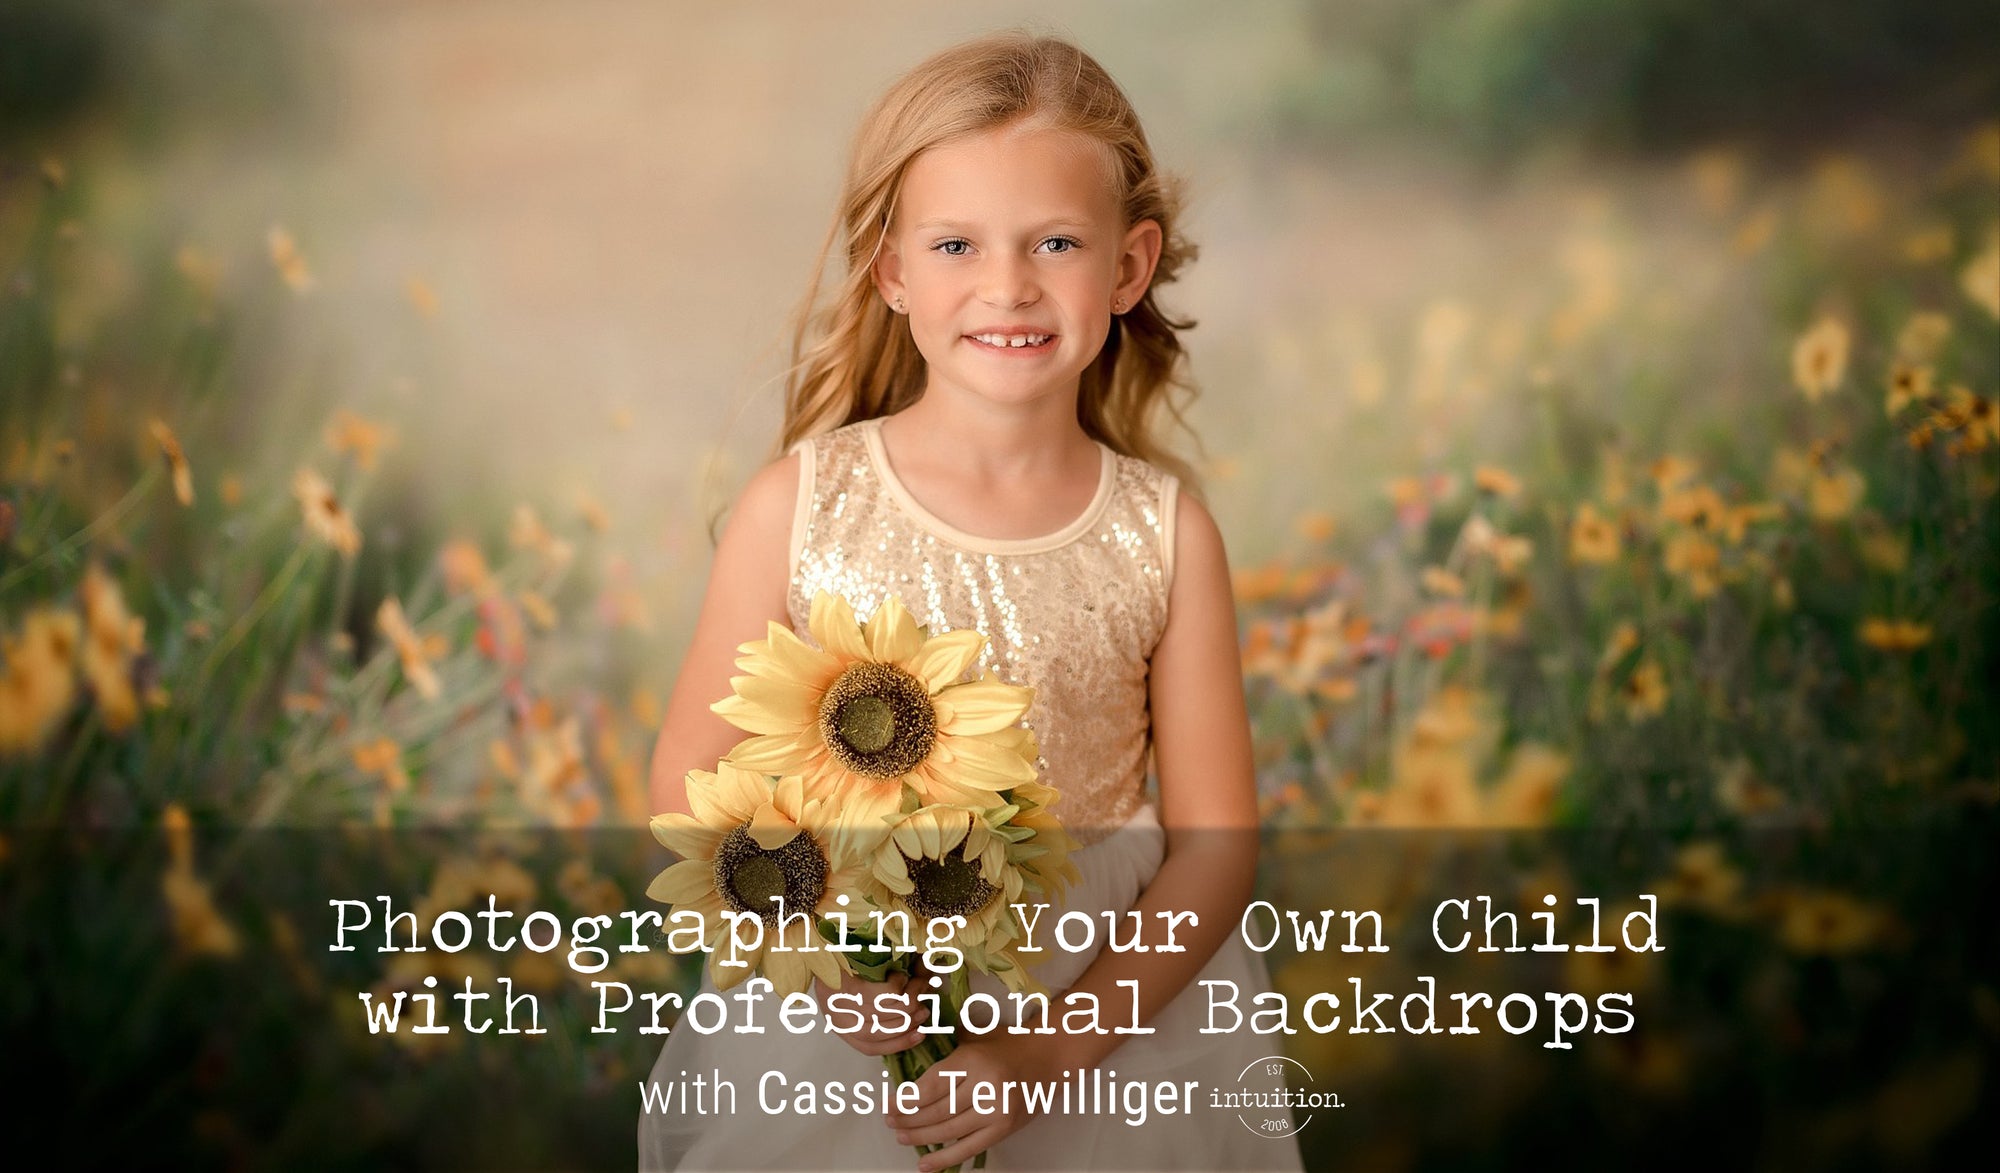 Photographing Your Own Child with Professional Backdrops with Cassie Terwilliger